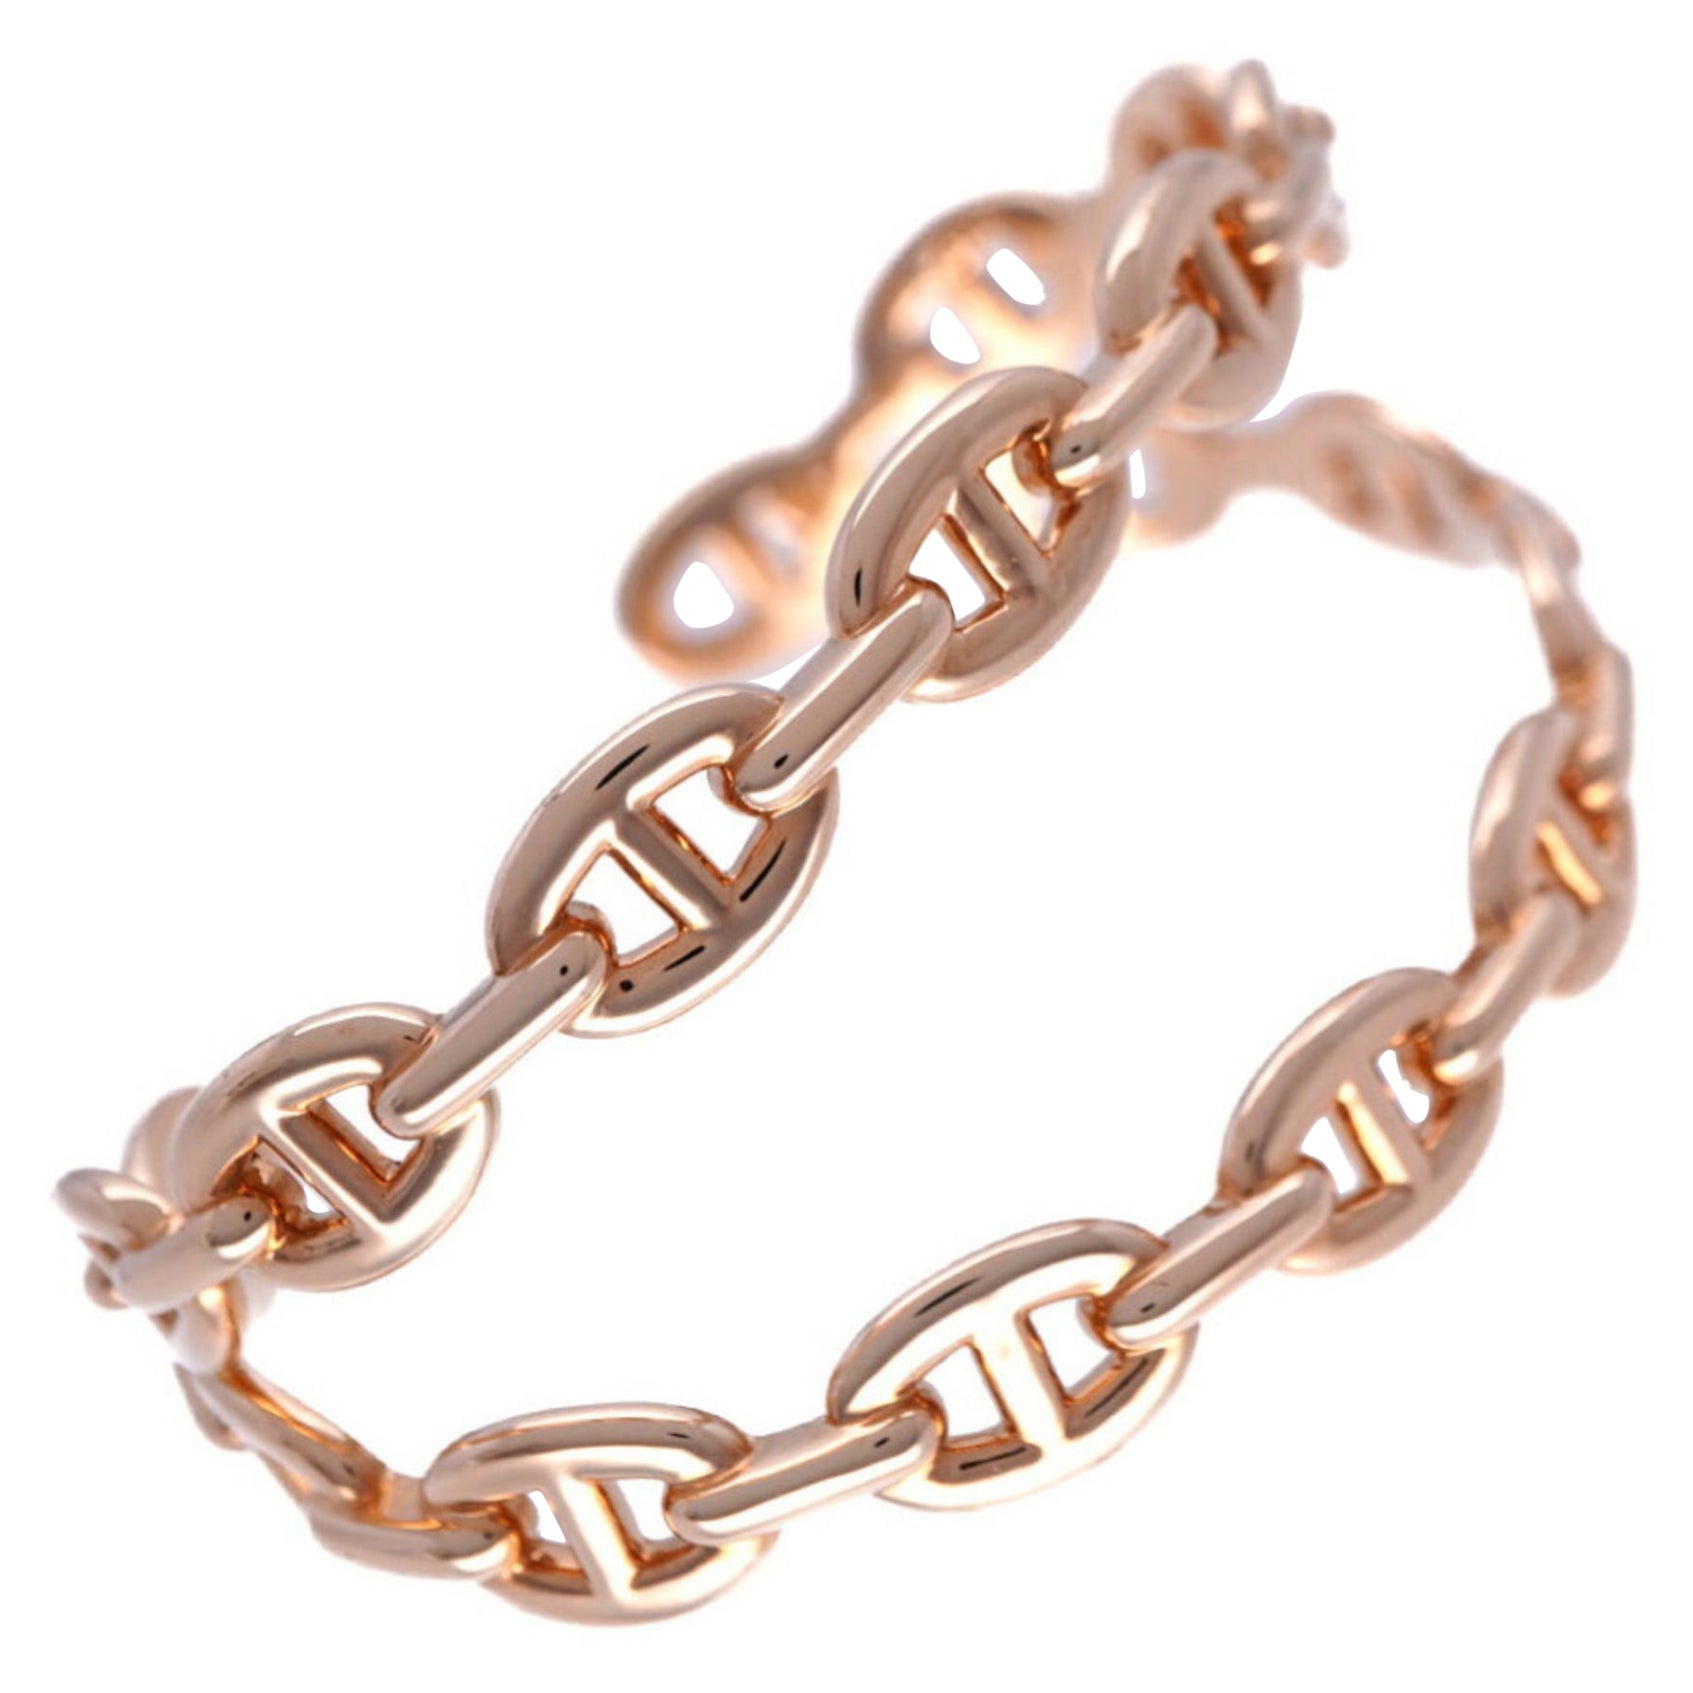 Hermes Chene D'Ancle Anchenee Double Bracelet in 18K Pink Gold